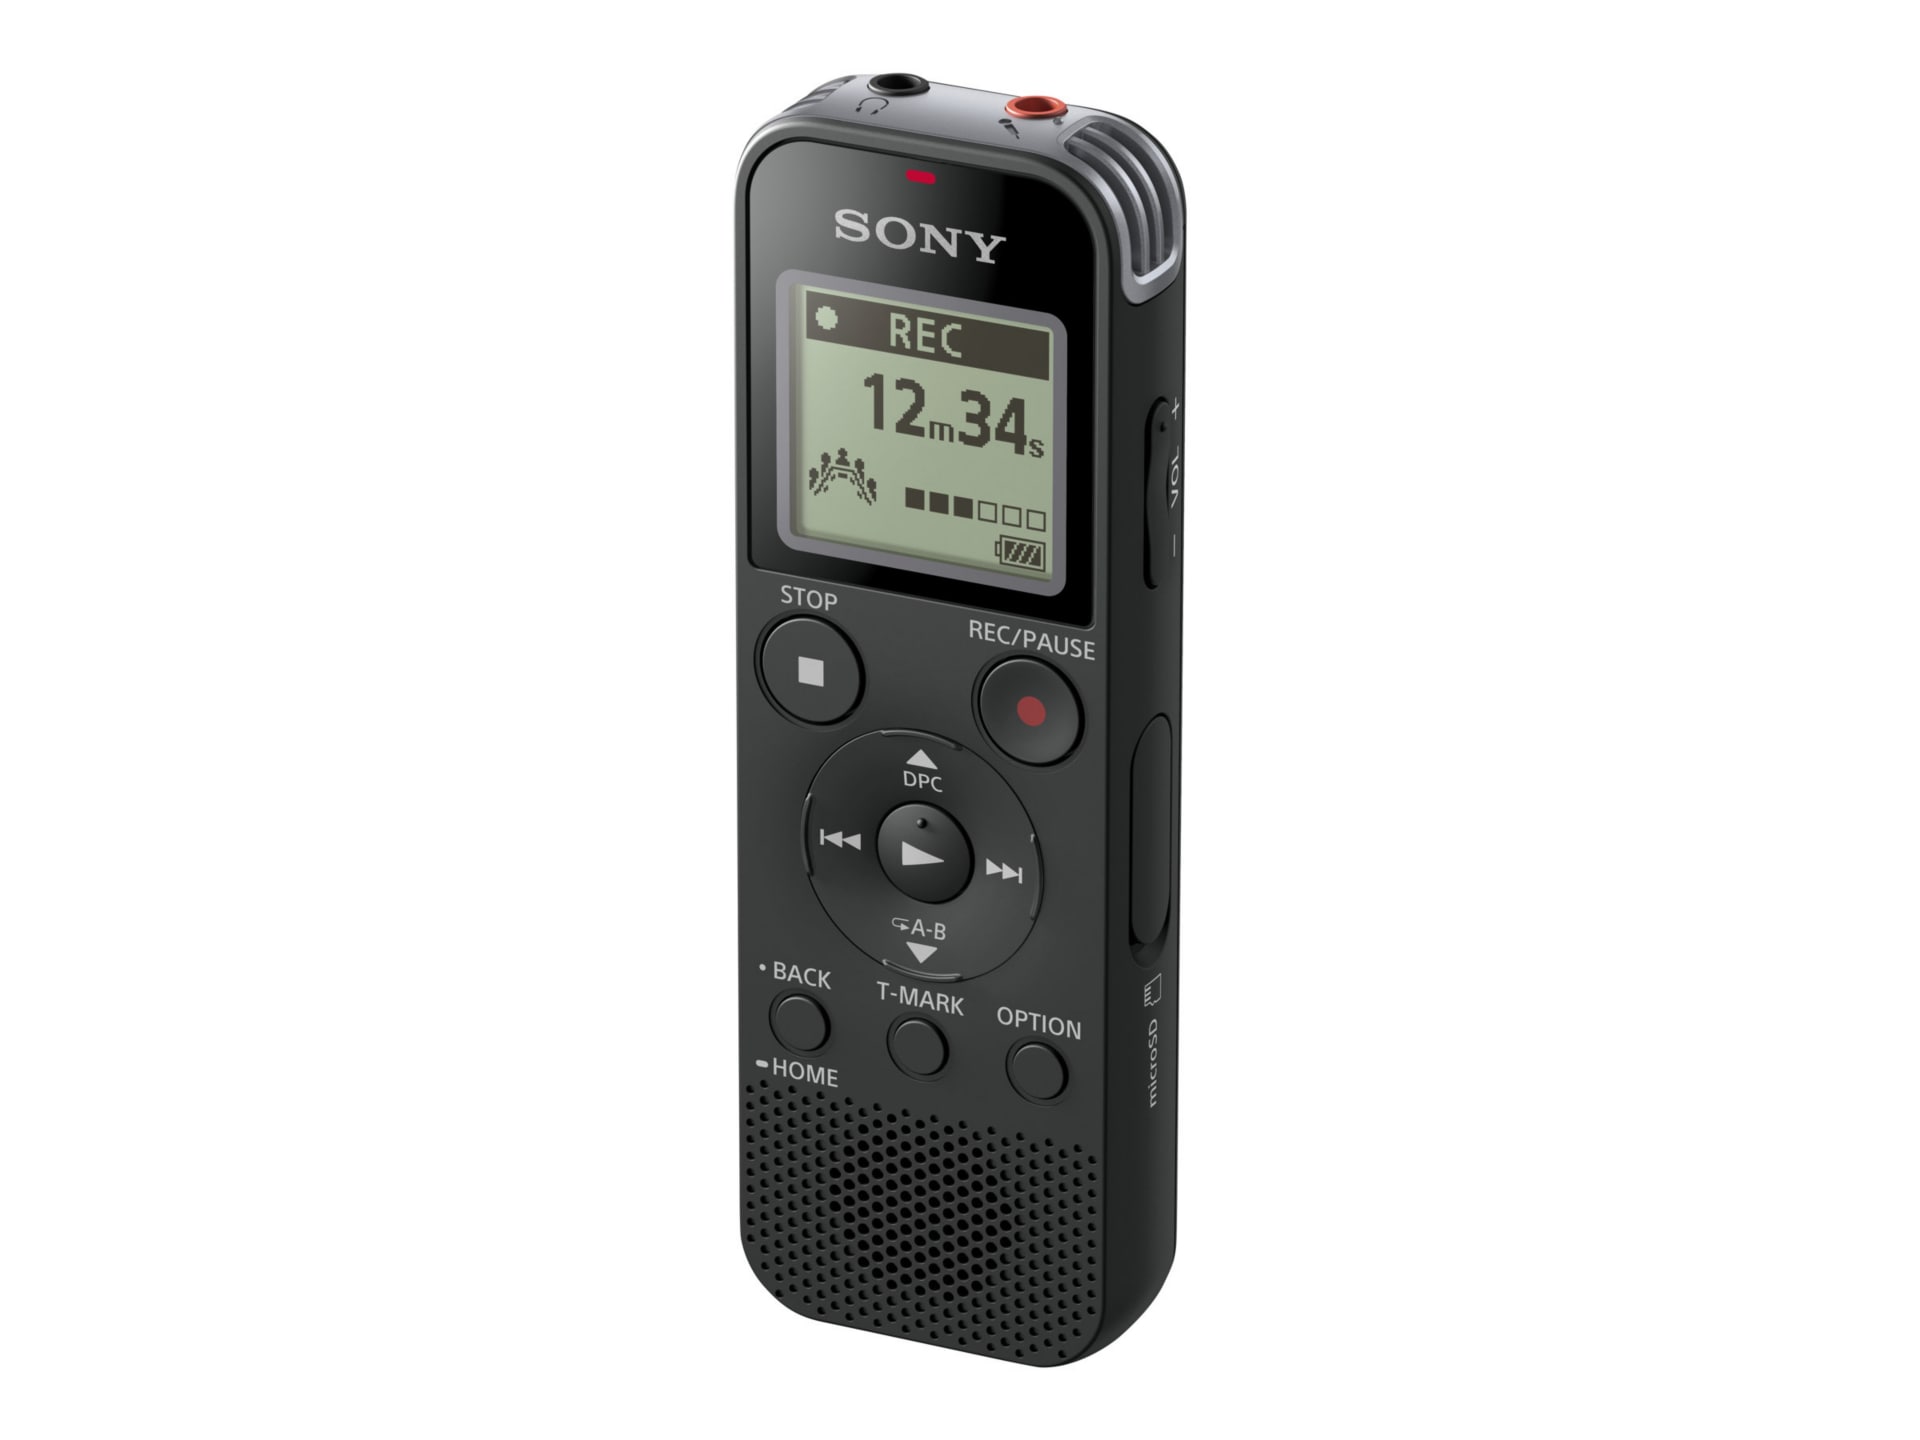 Sony ICD-PX470 - voice recorder